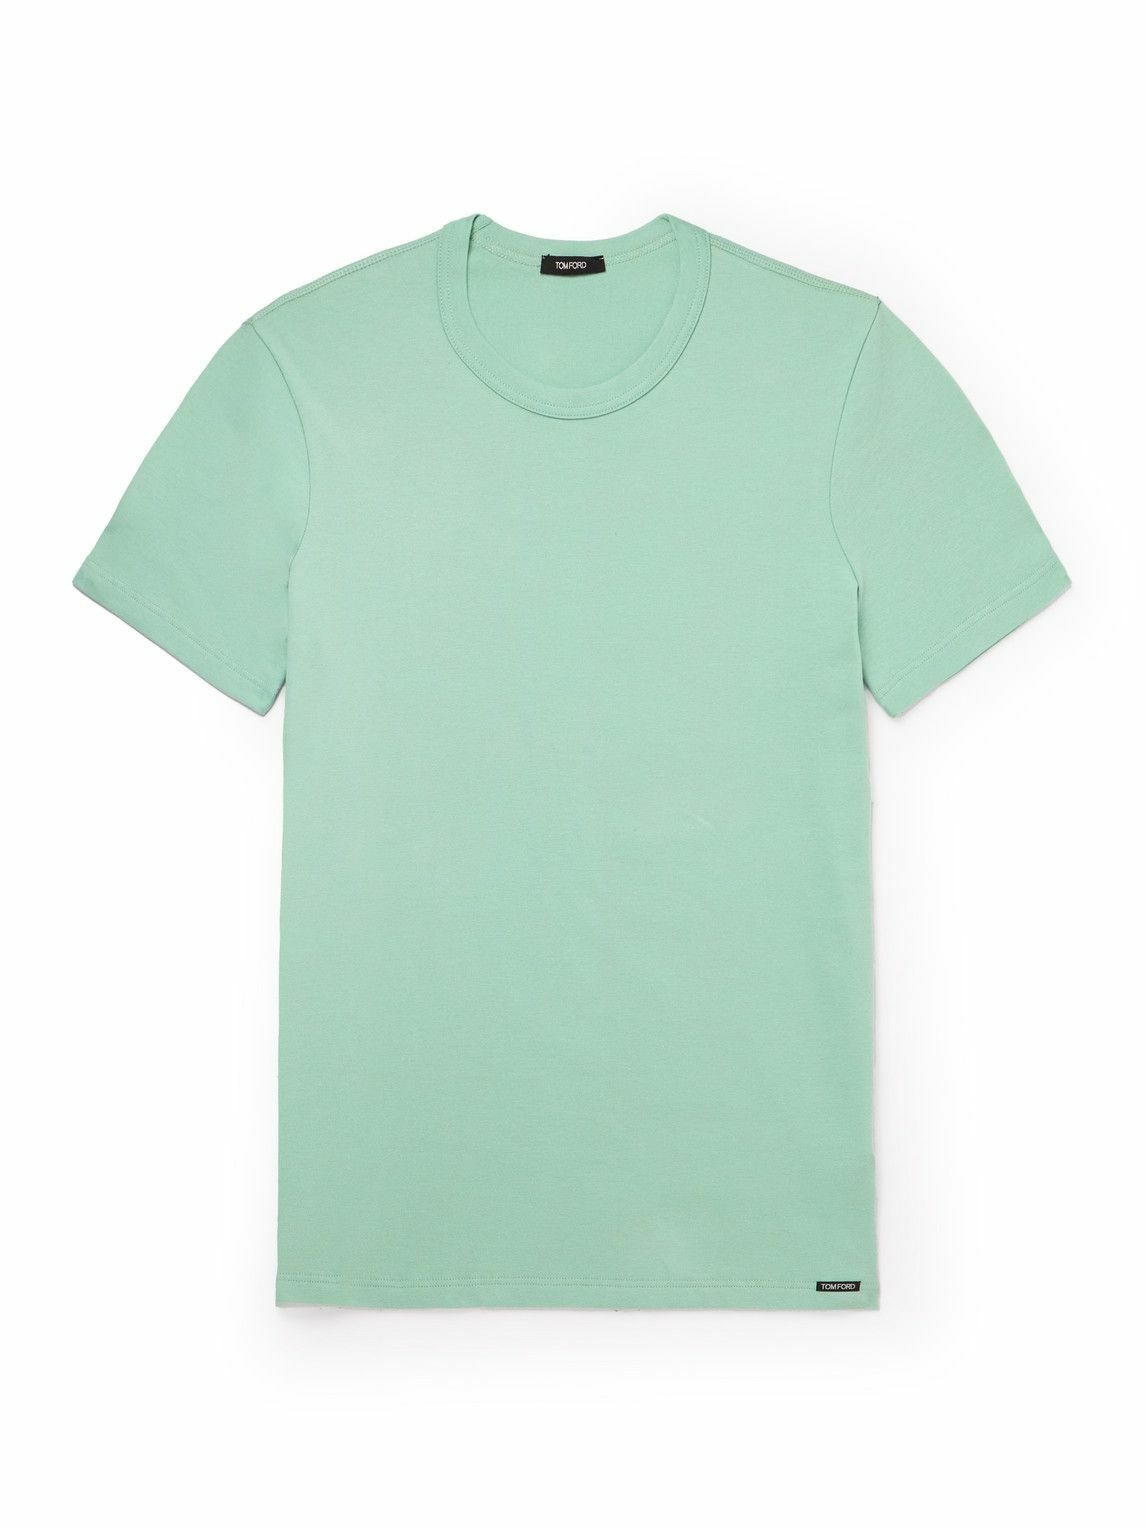 TOM FORD - Stretch-Cotton Jersey T-Shirt - Green TOM FORD